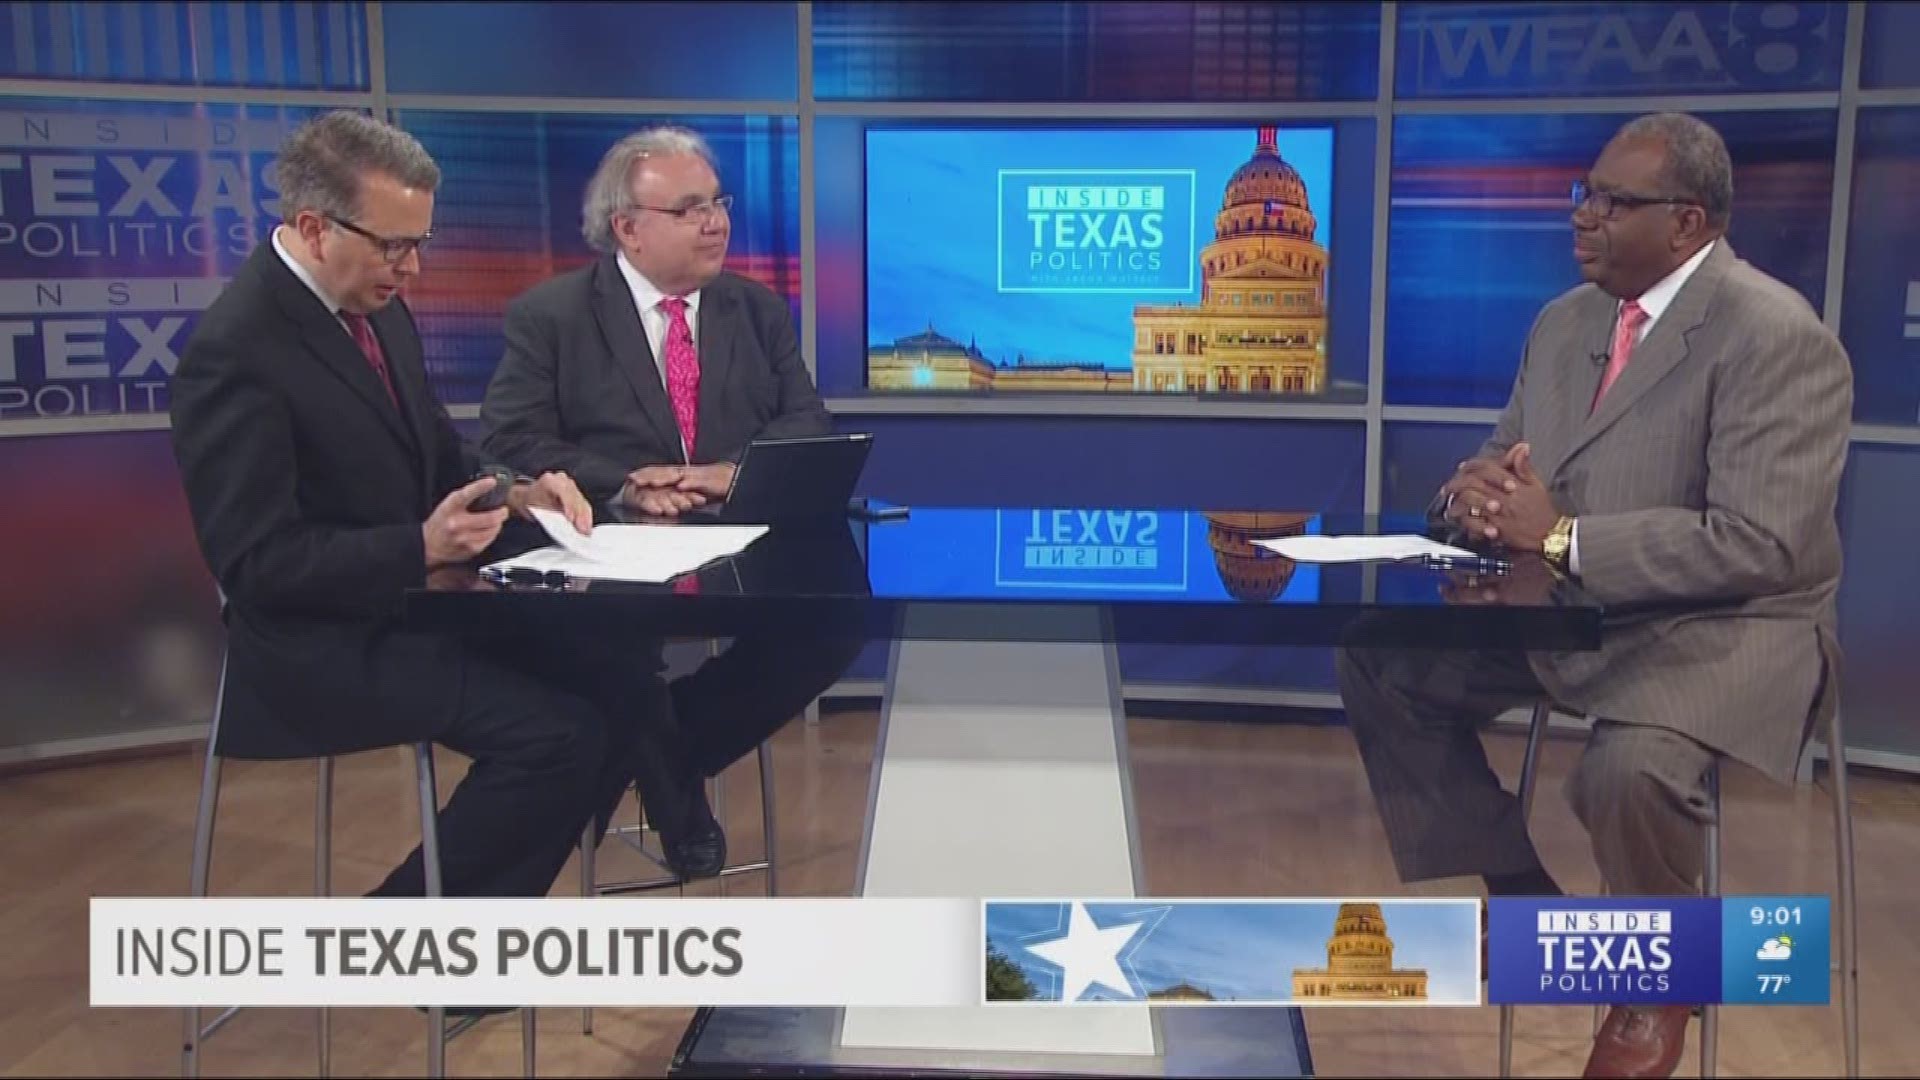 Inside Texas Politics began with Democratic State Senator Royce West in studio to discuss the changes needed in Senate Bill 30 (SB30) - commonly referred to as the Community Education Act. 